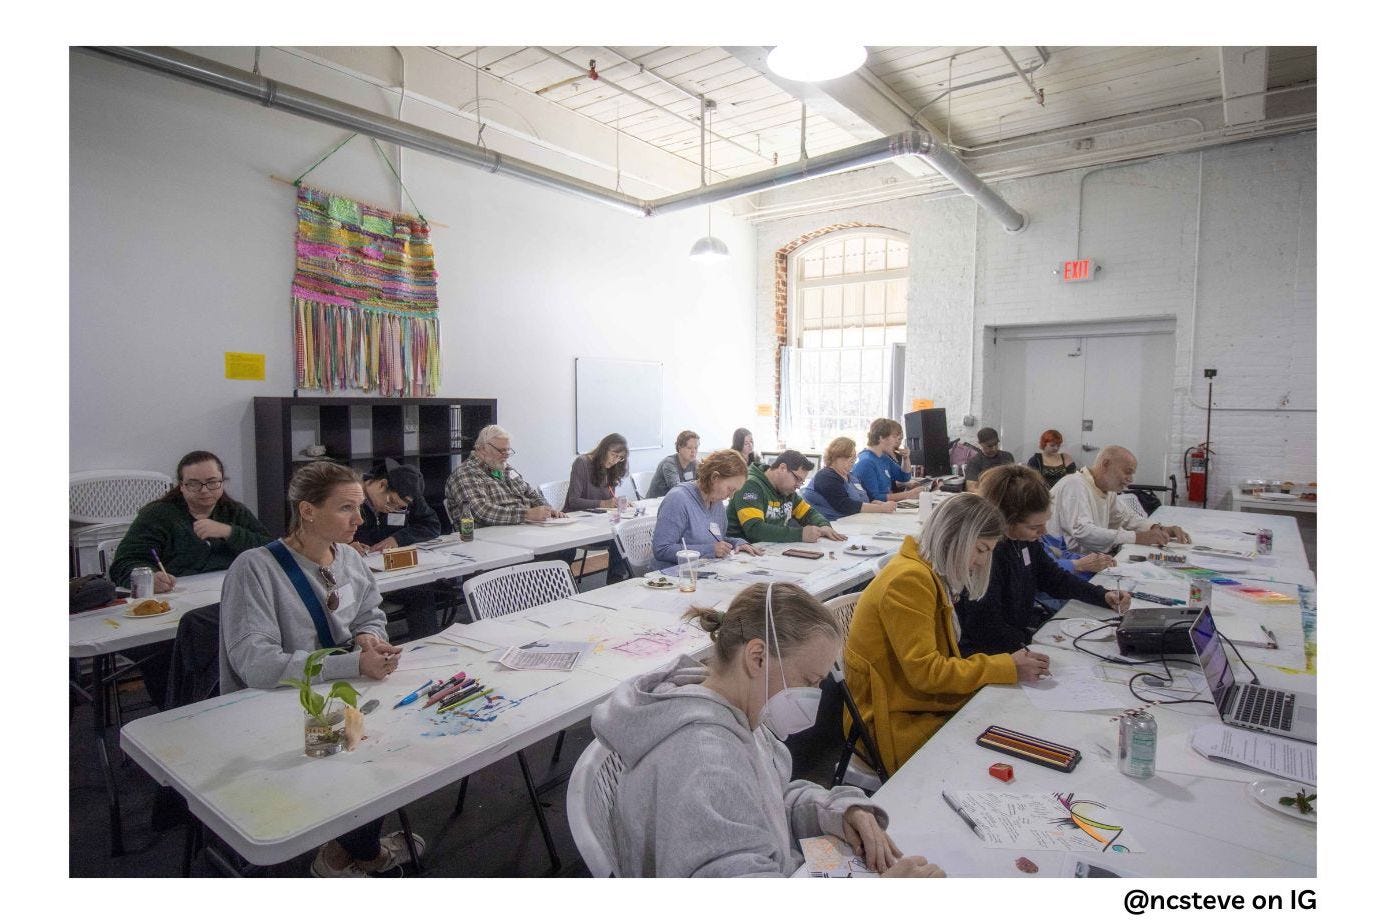 A full class picture. Everyone is working on their still life drawing warm-ups at long white tables with art supplies scattered around. There is a large window emitting light and a large colorful tapestry hanging on the wall behind the class.